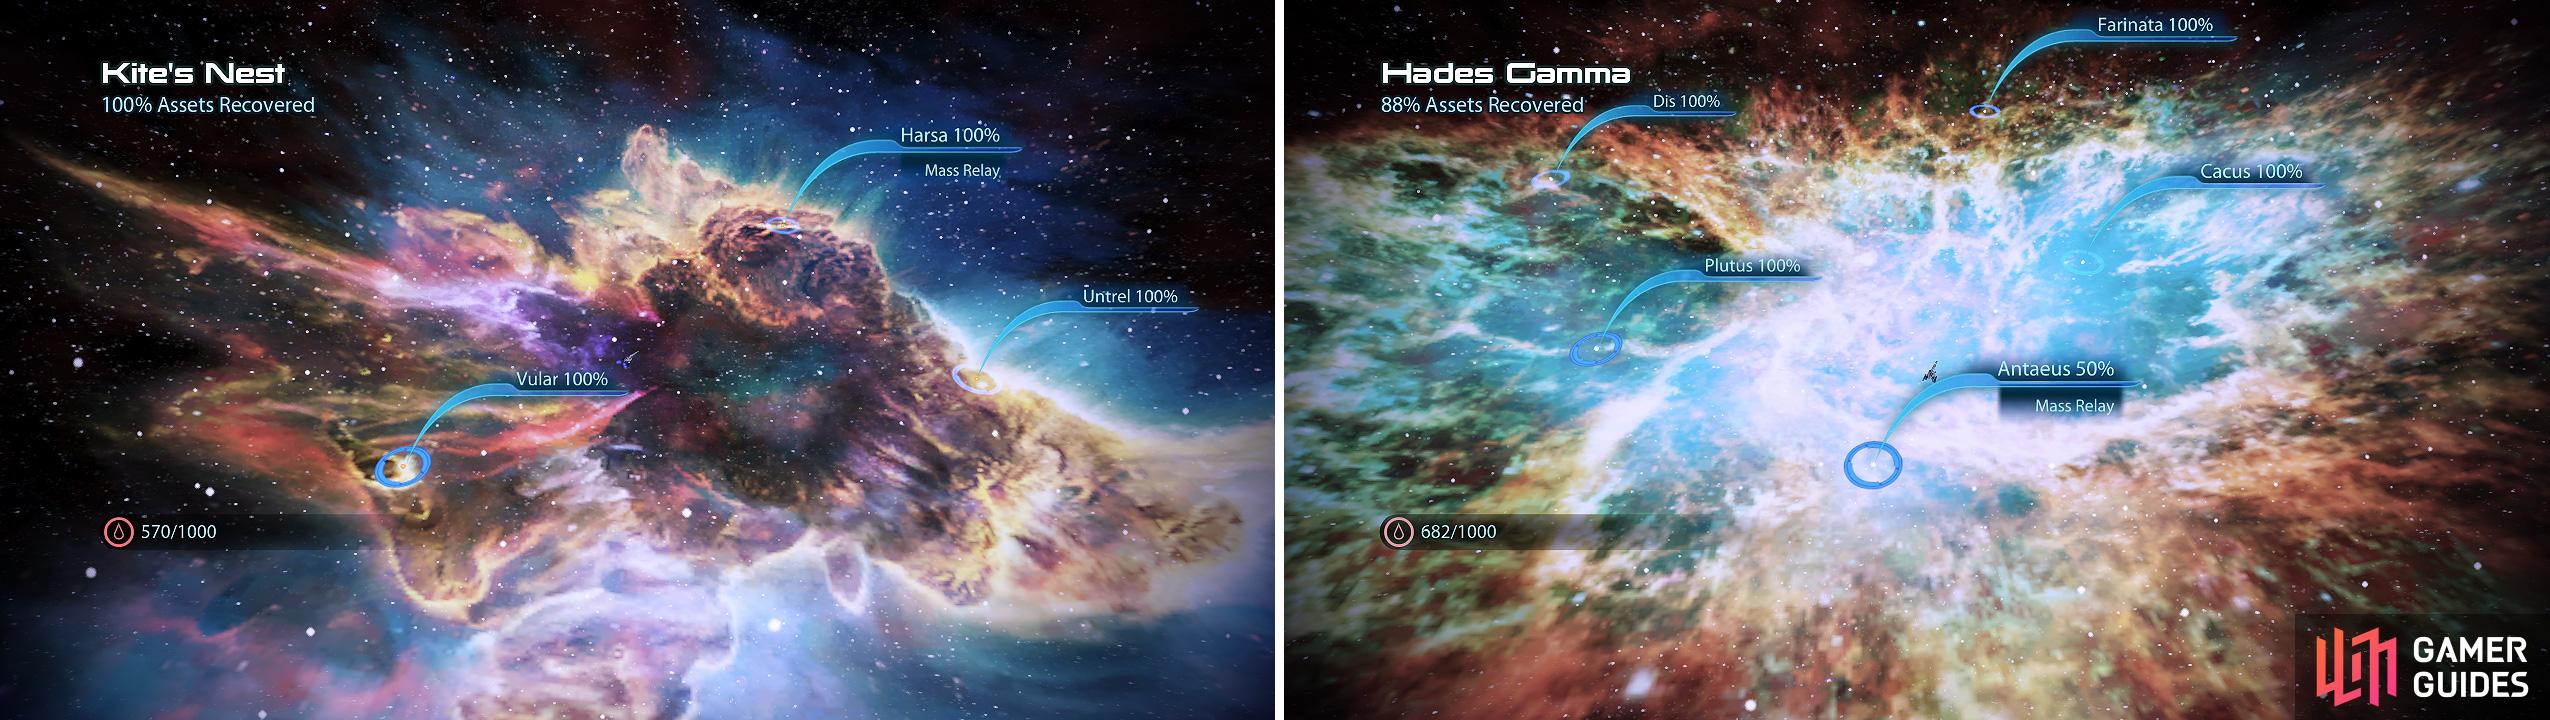 The Kite’s Nest is a large area, holding a plethora of things to uncover (left). The beautiful Hades Gamma is home to some new War Assets and quite a few Credits (right).